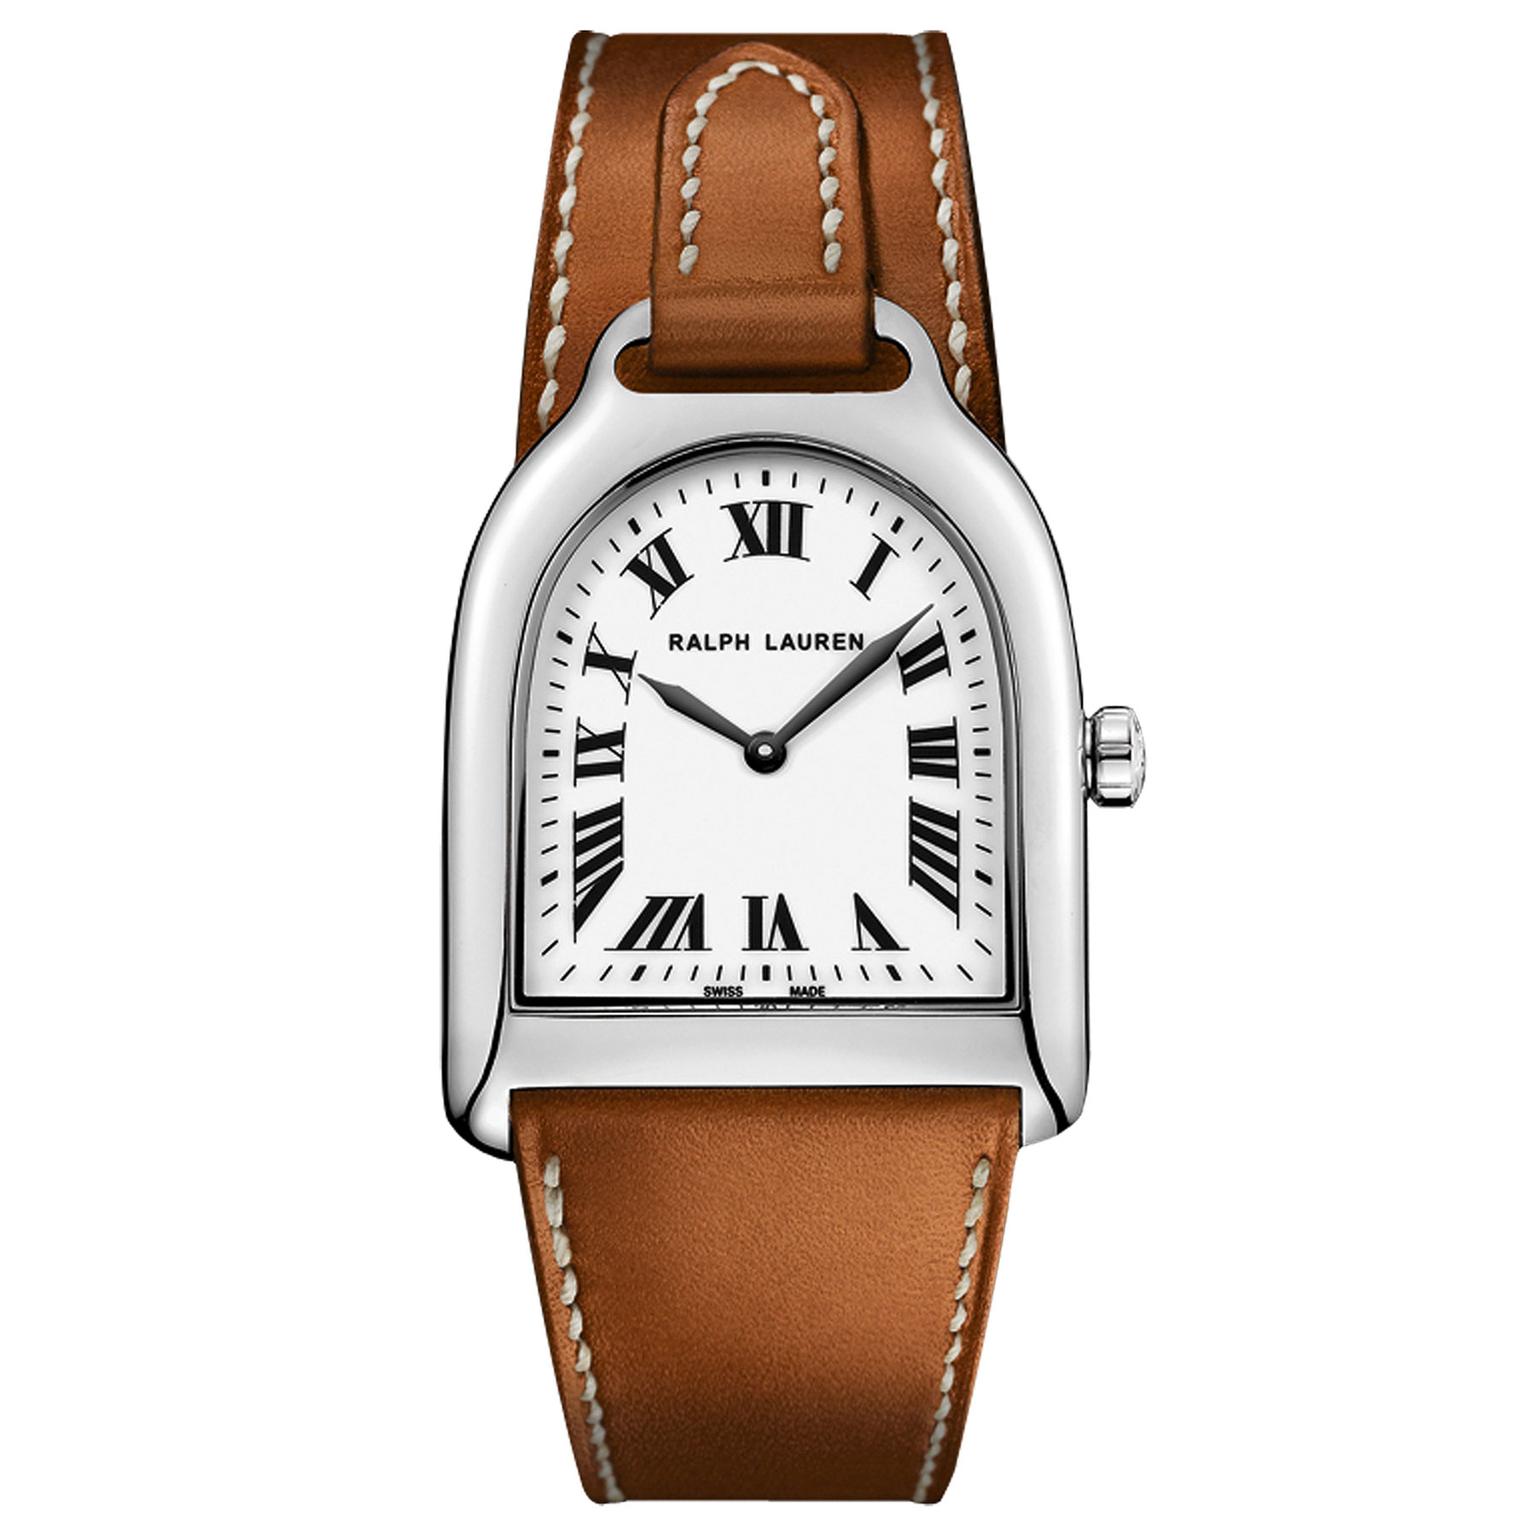 Ralph Lauren Small Stirrup watch for women in staliness steel with a leather strap 